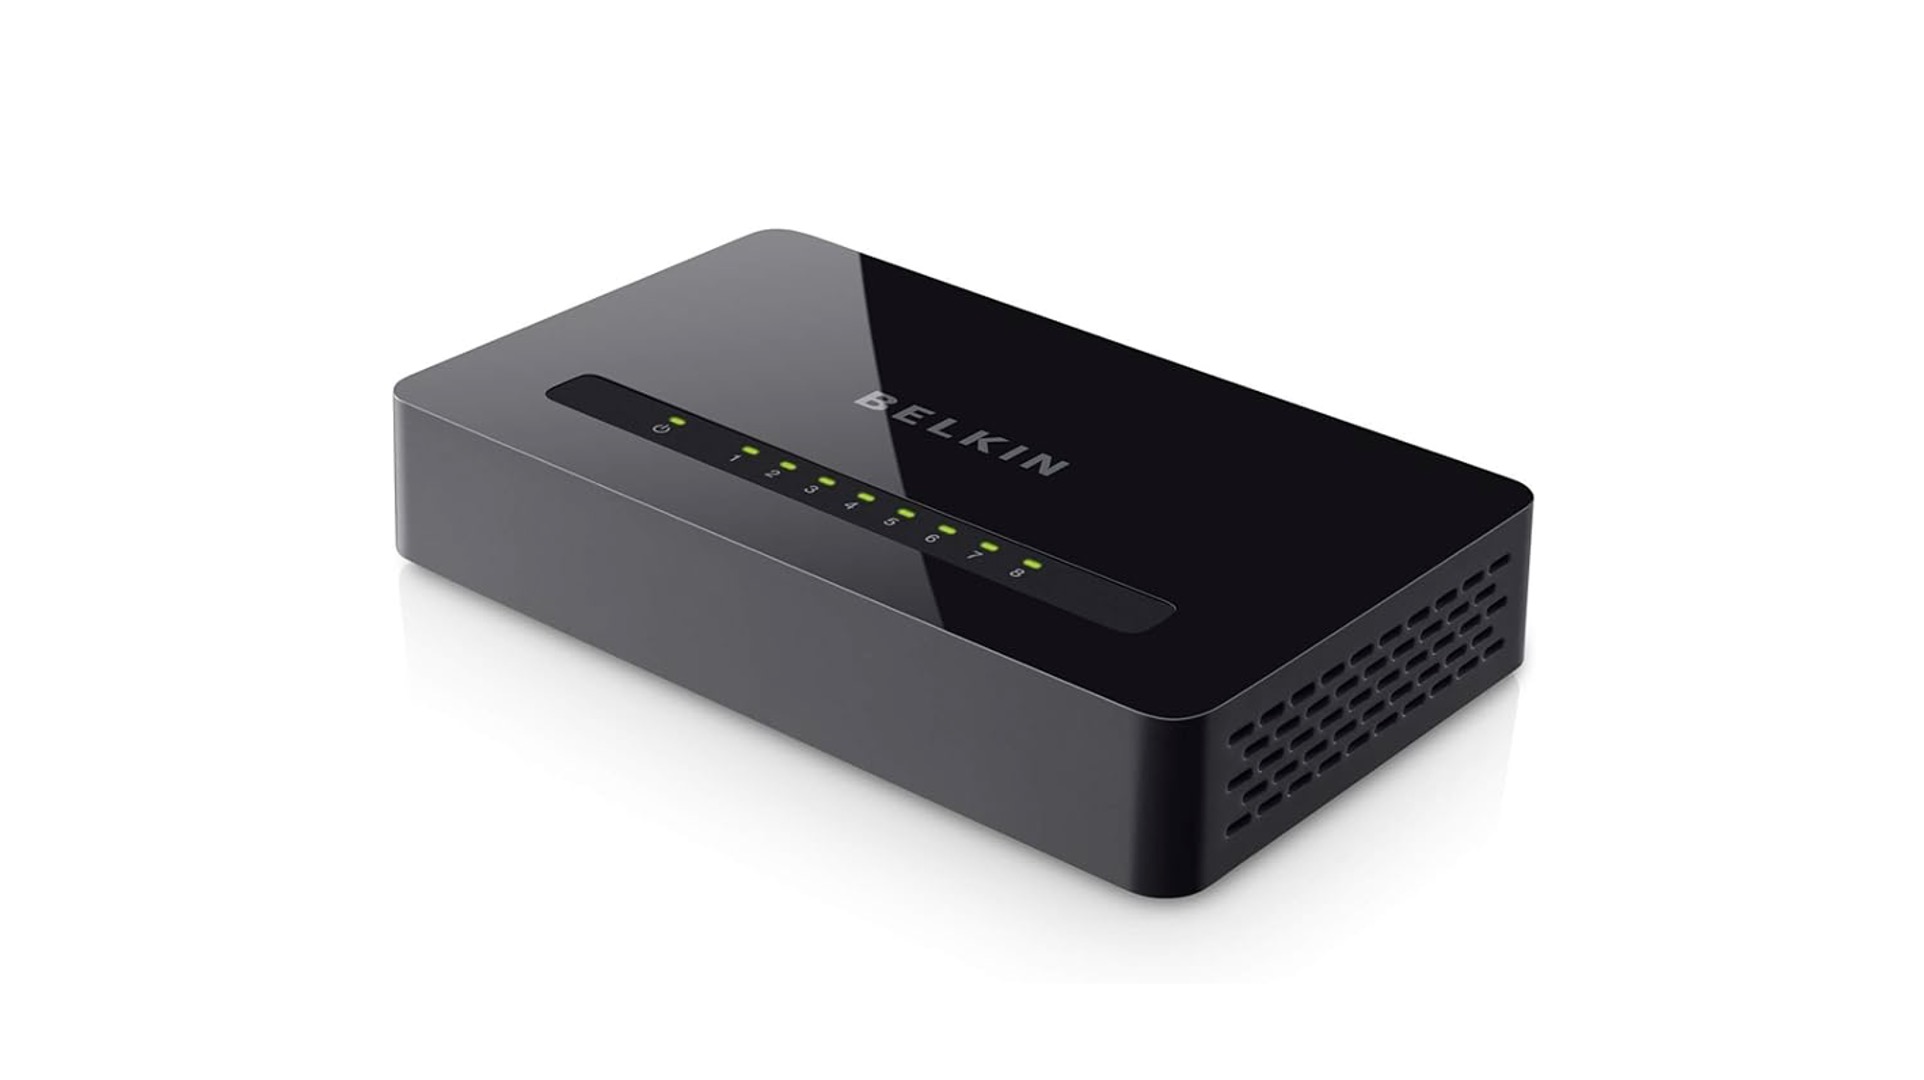 How To Hook Up The Belkin Wired 8-Port 10/100 Network Switch